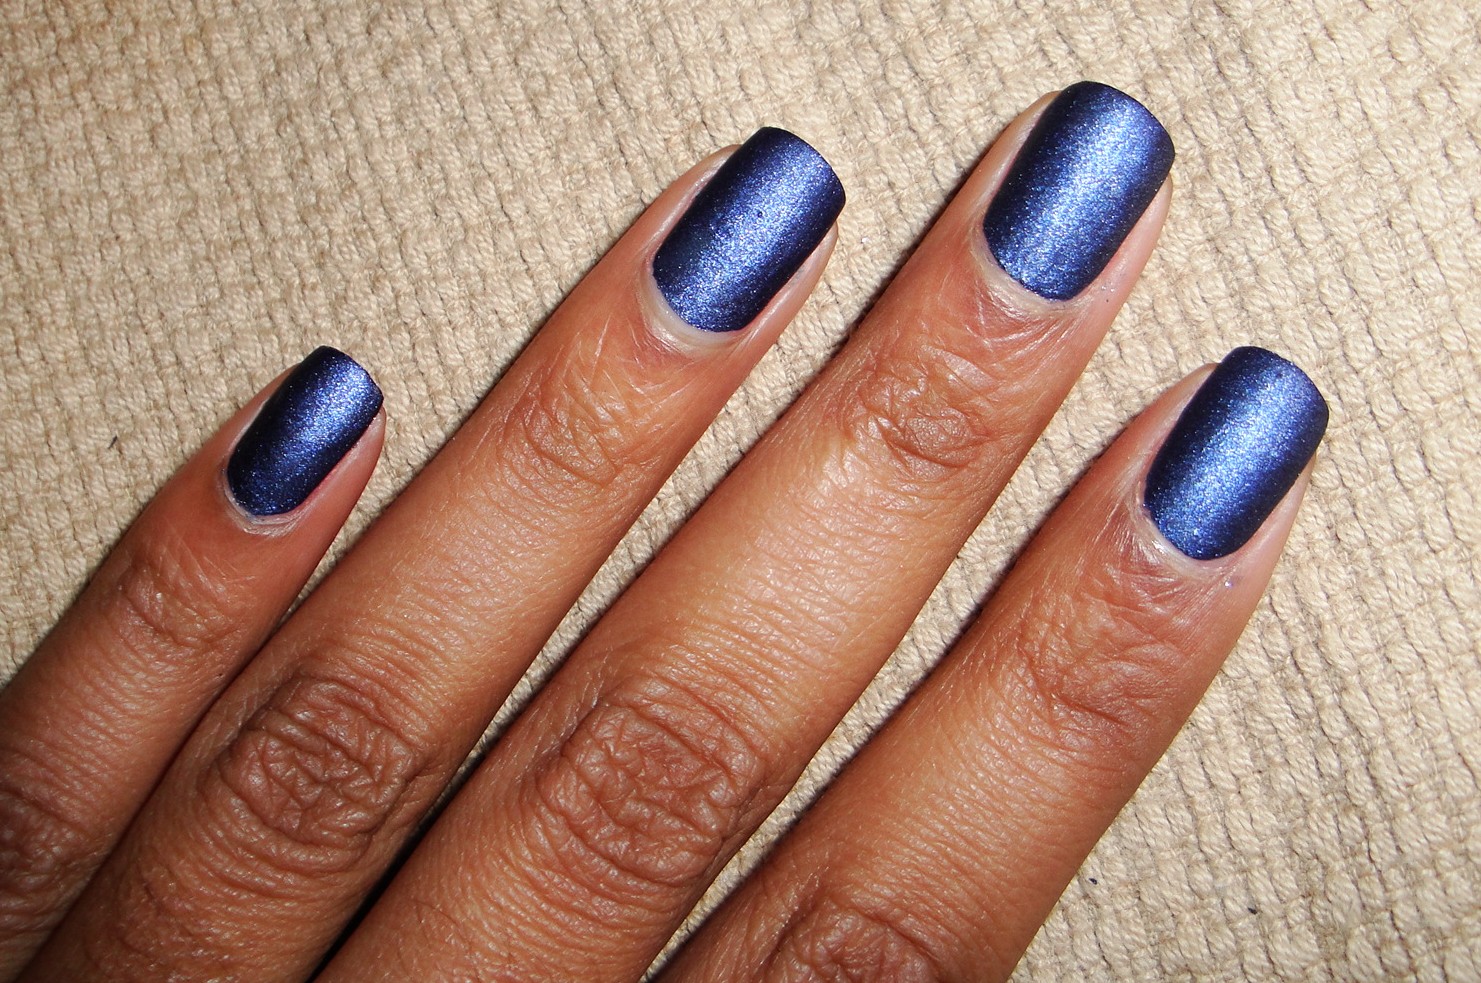 5. OPI Nail Lacquer in "Russian Navy" - wide 5